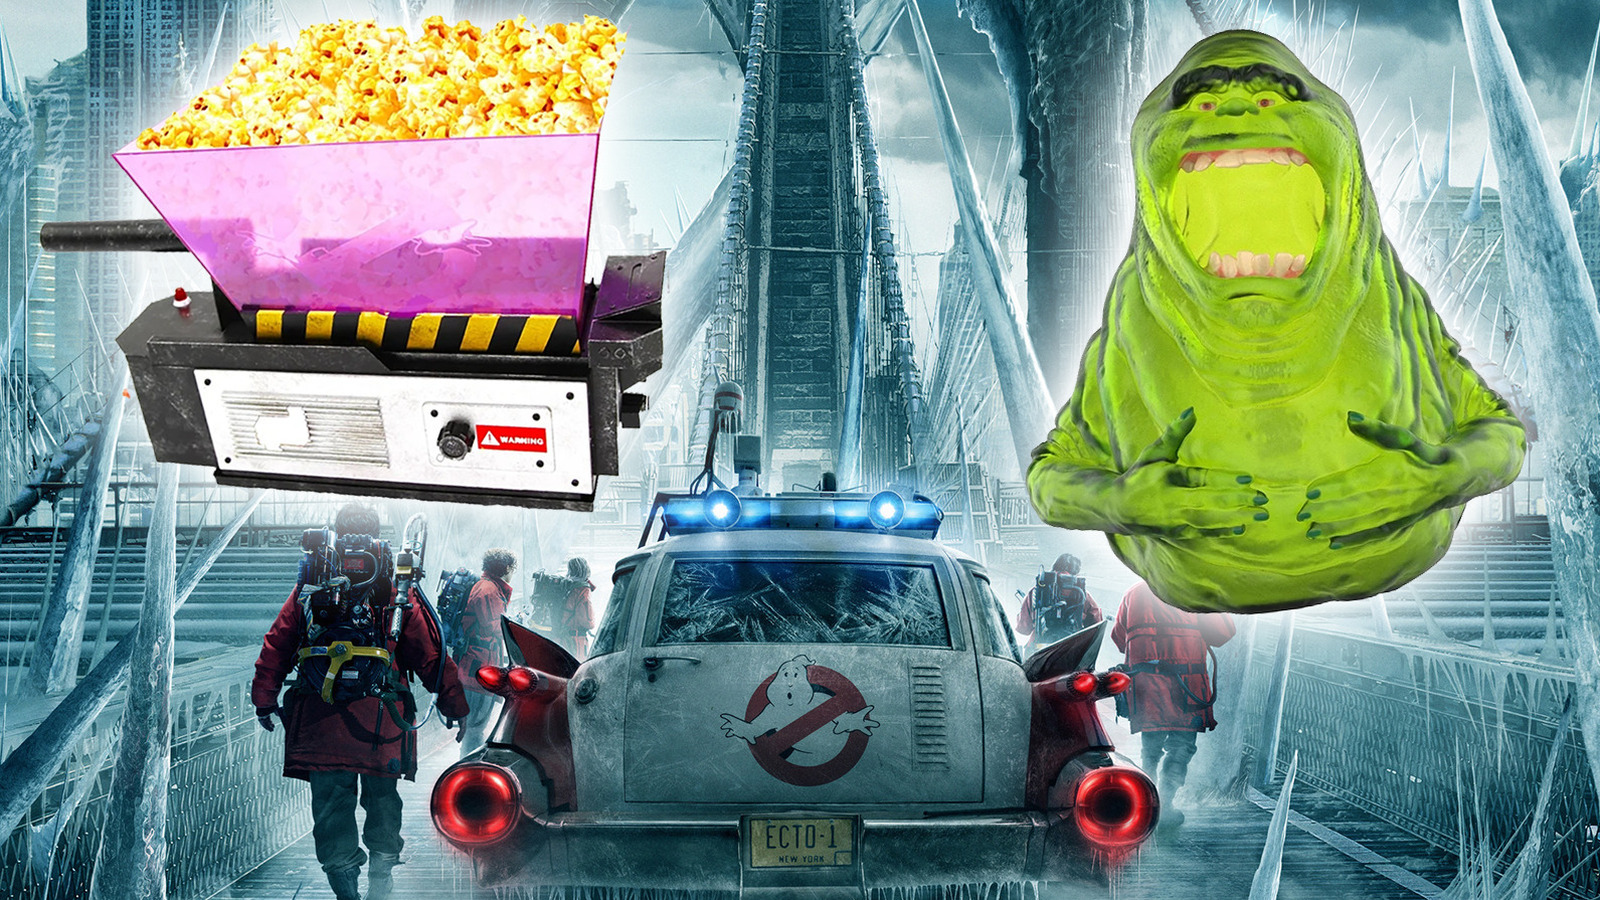 Cool Stuff Slimer And Ghost Trap Popcorn Buckets Emerge For